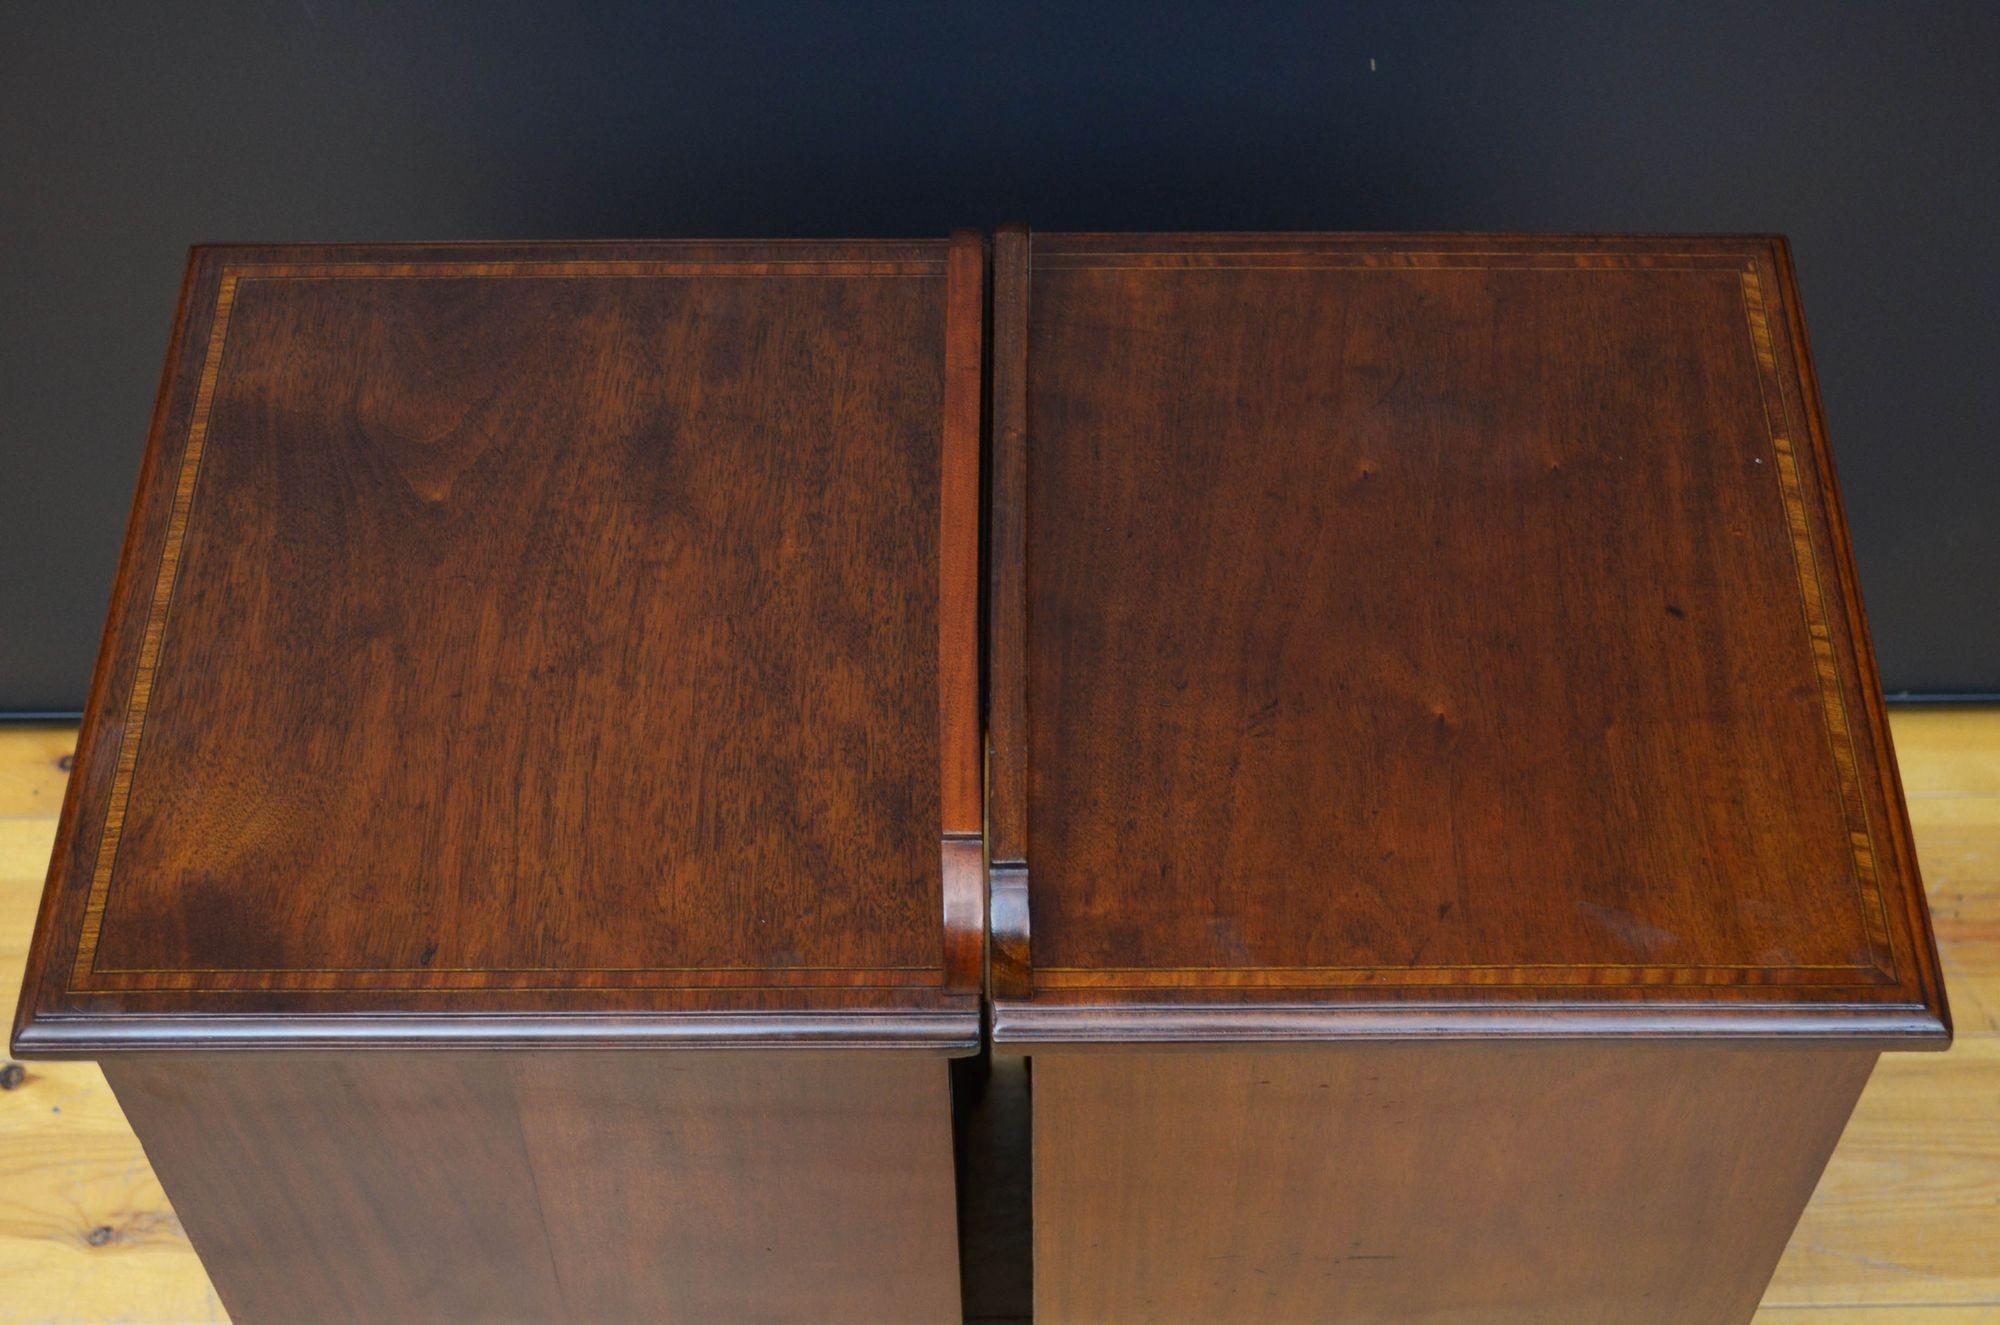 20th Century Maple and Co Bedside Cabinets in Mahogany